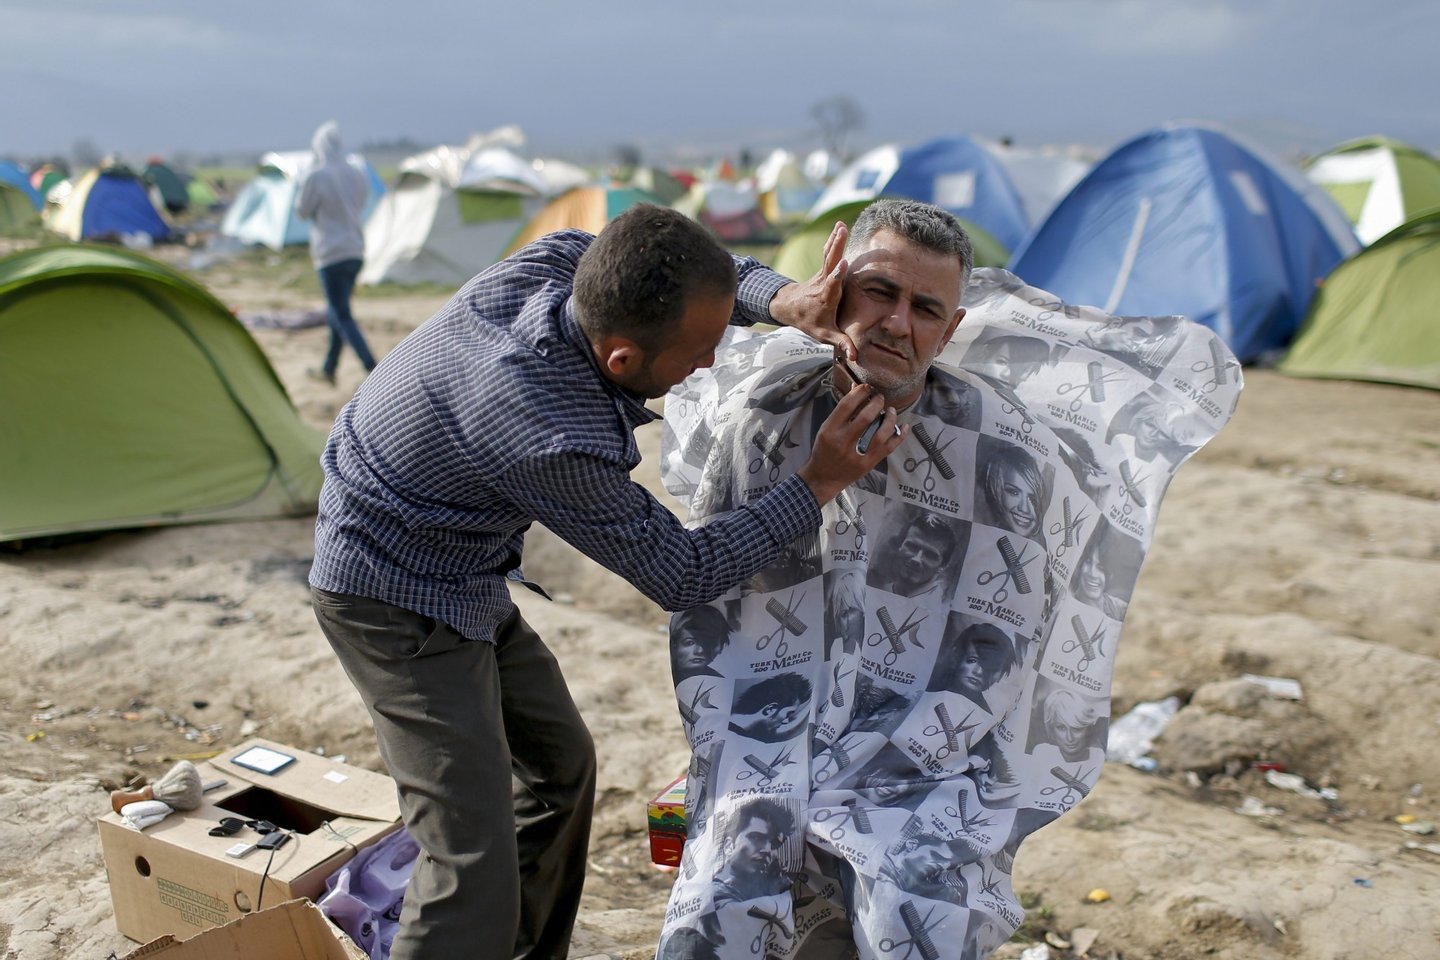 Still thousands of refugees massing in Idomeni to enter Macedonia